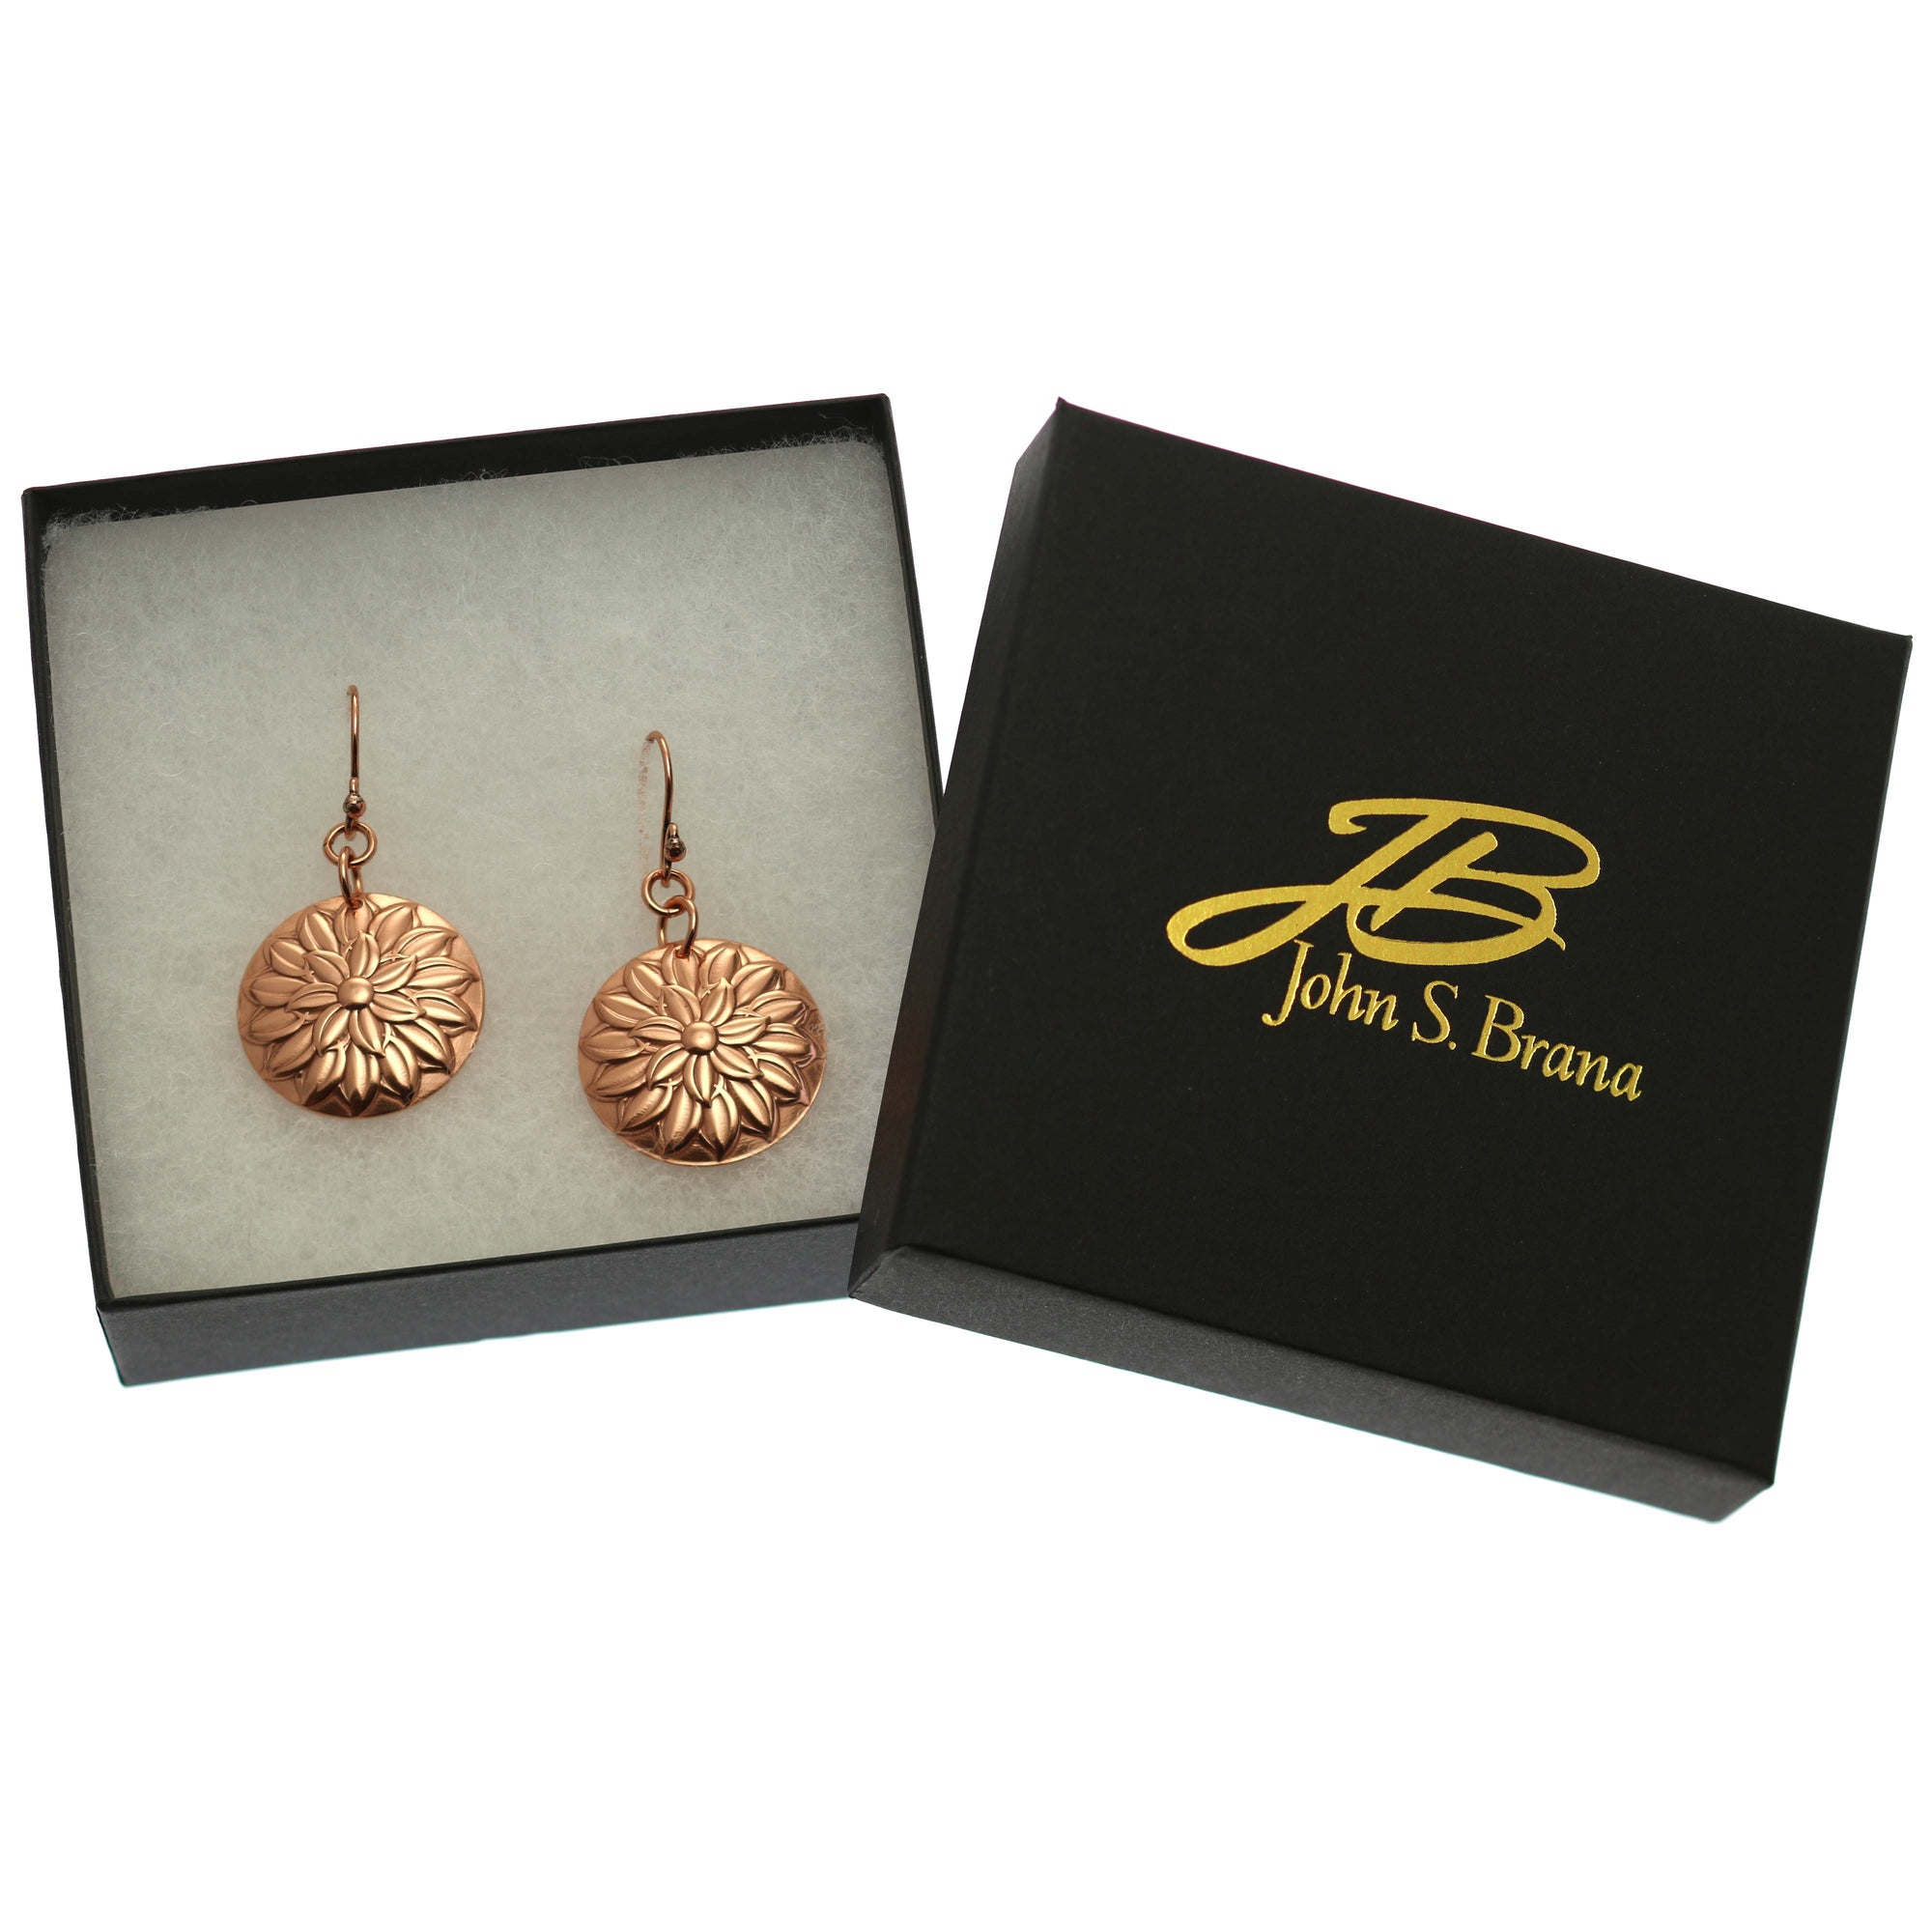 Chrysanthemum Copper Disc Earrings in Black Gift Box with Gold Logo